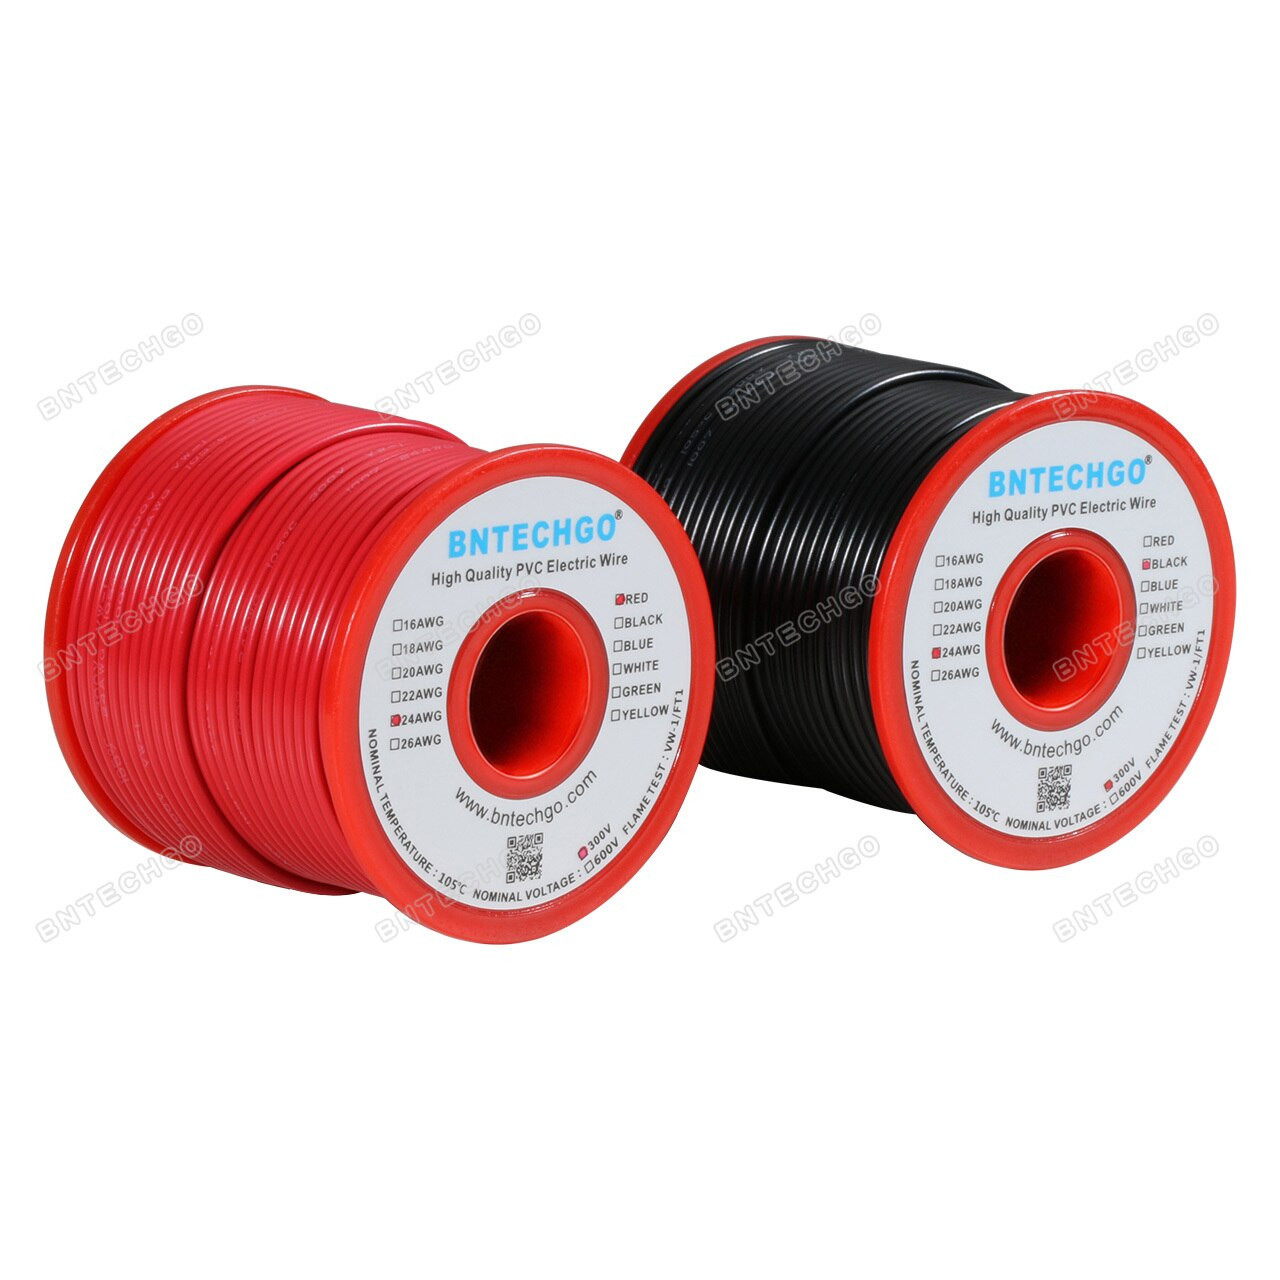 BNTECHGO 24 AWG 1007 Electric Wire 24 Gauge PVC 1007 Wire Solid Wire Hook  Up Wire 300V Solid Tinned Copper Wire Red and Black Each Color 100 ft Per